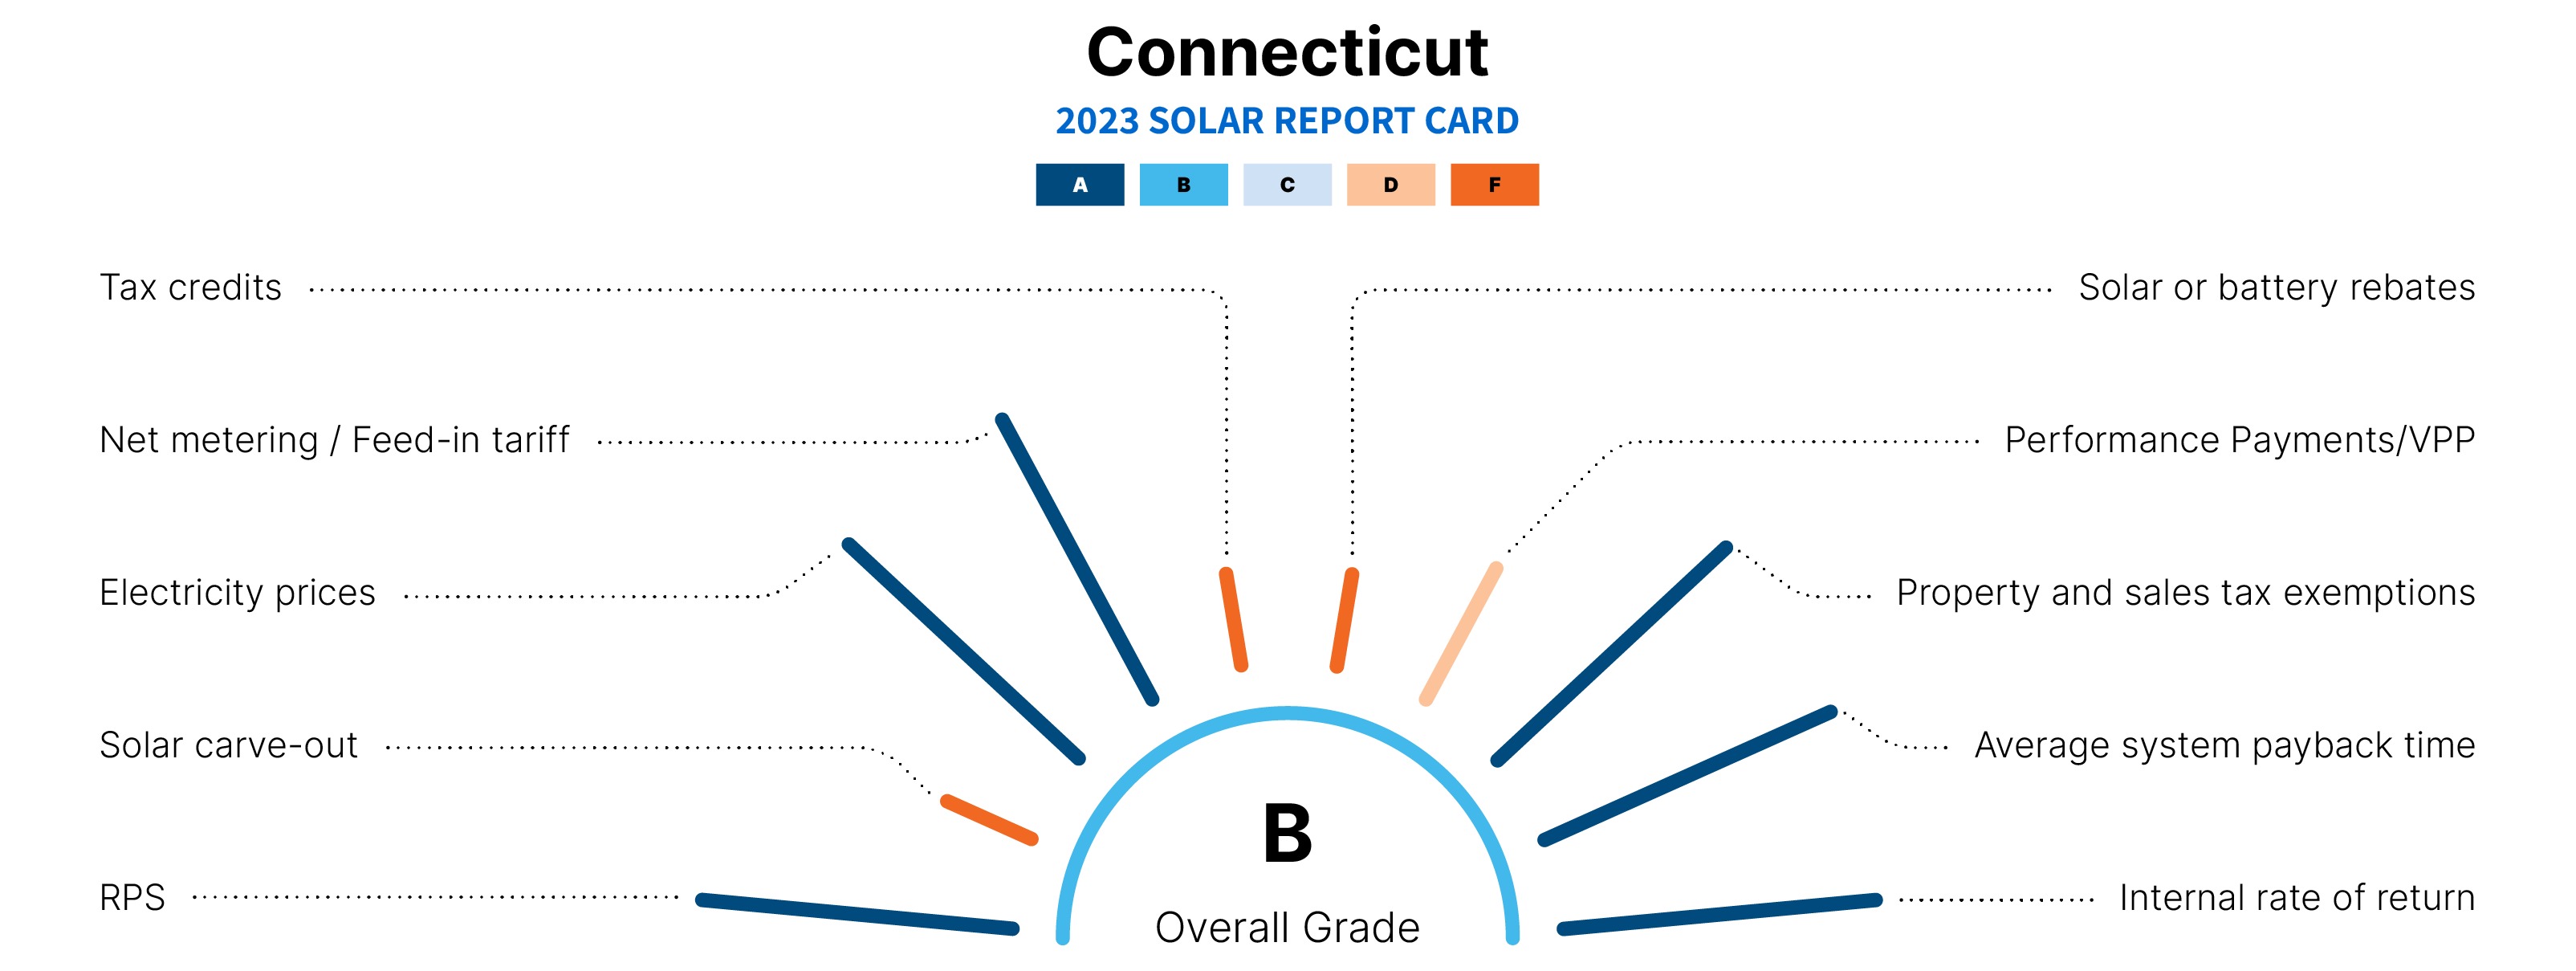 graphic explaining why ct is a top state for solar